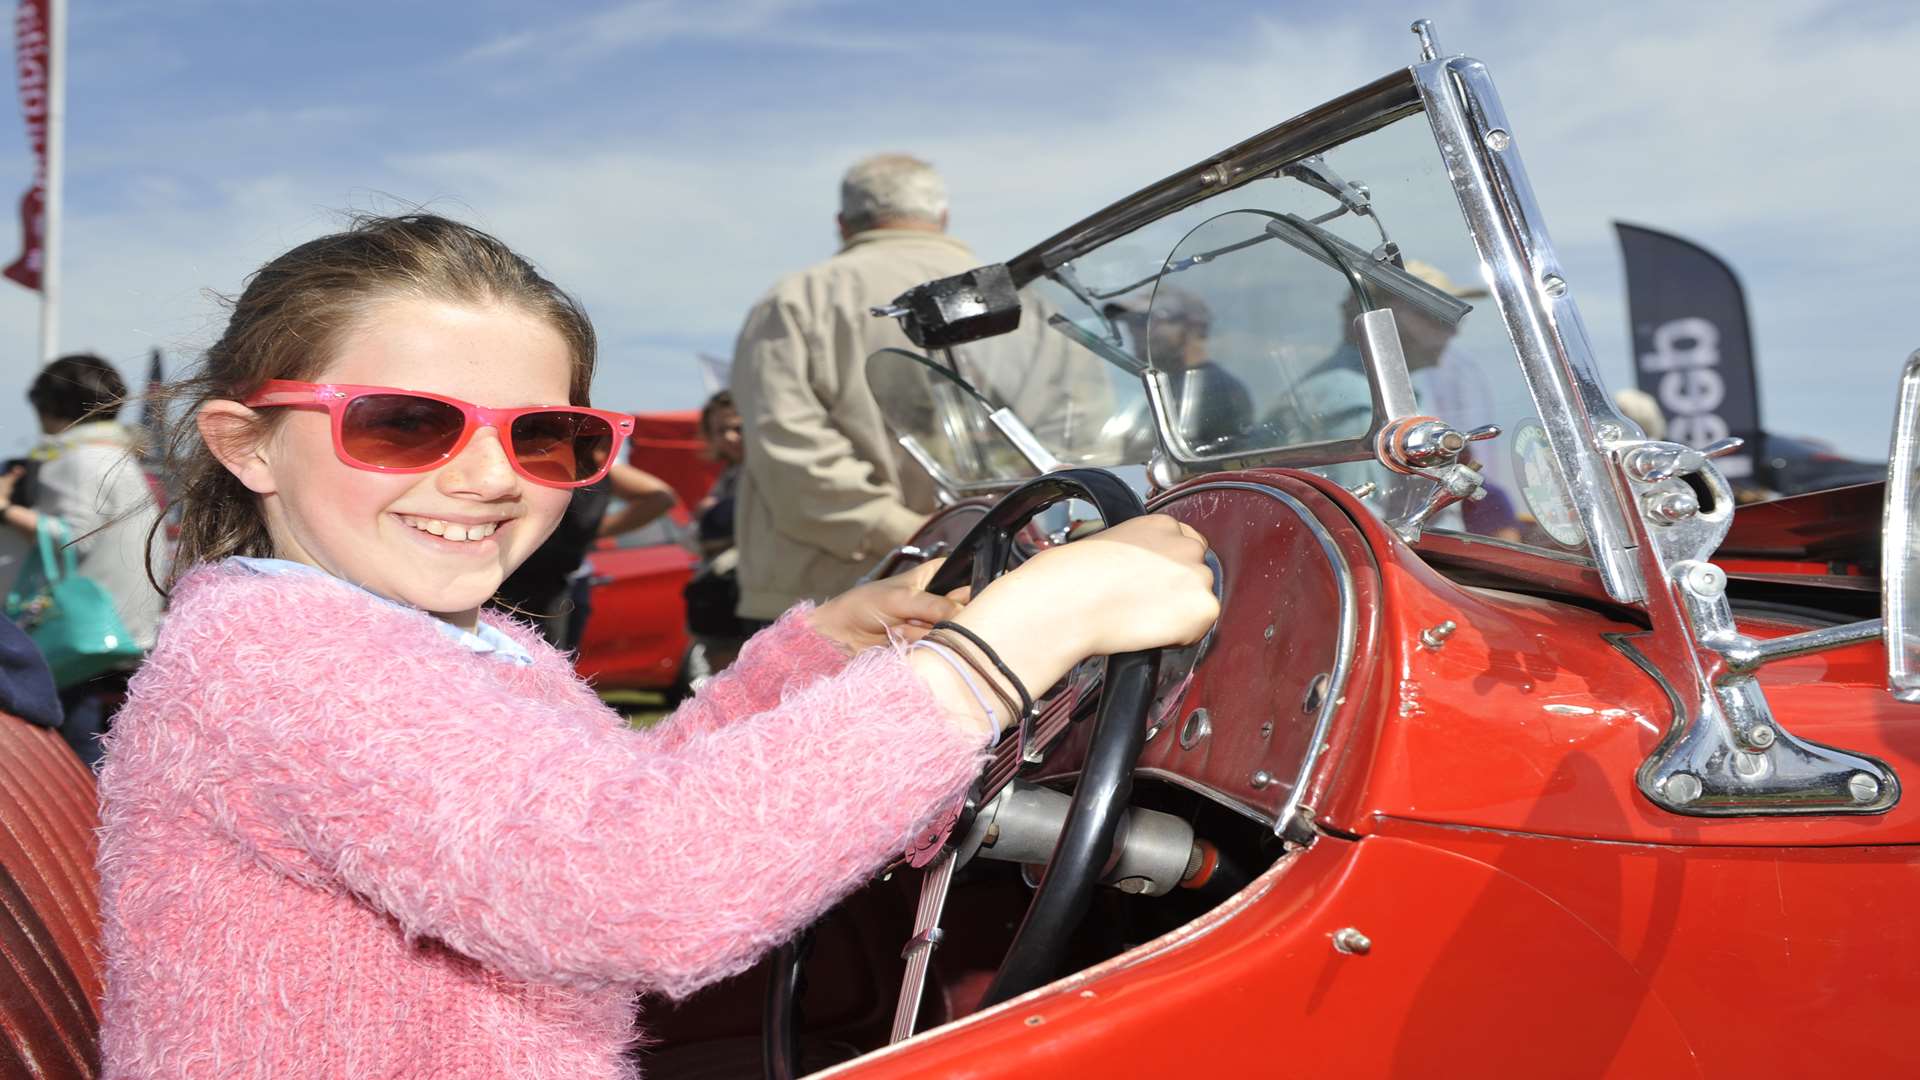 Ten-year-old Rose Solley behind the wheel at last year's show